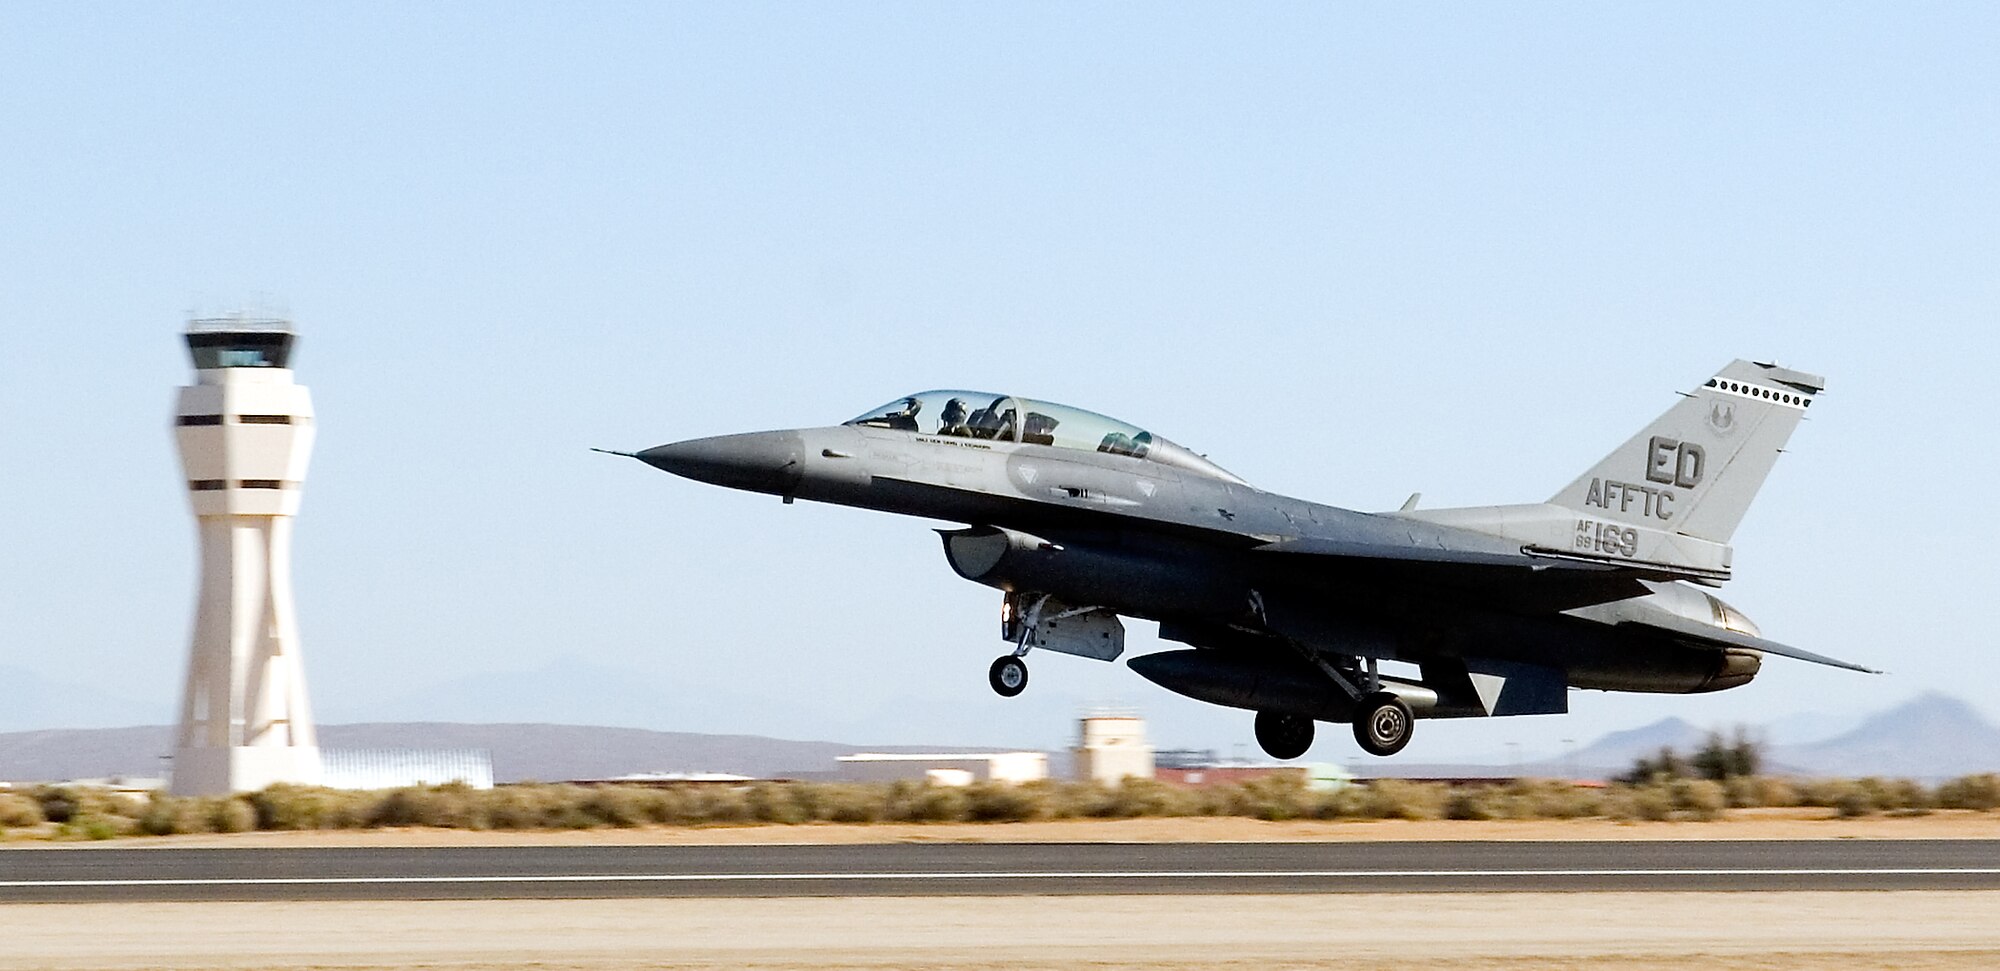 Maj. Gen. David Eichhorn, Air Force Flight Test Center commander, takes off in his F-16 Fighting Falcon from Edwards' new temporary runway here May 19. General Eichhorn's flight marked the temporary runway's first use operationally. The temporary runway was built to help sustain base operations during the refurbishing of the main, 15,000-foot runway. (Air Force photo by Jim Shryne)